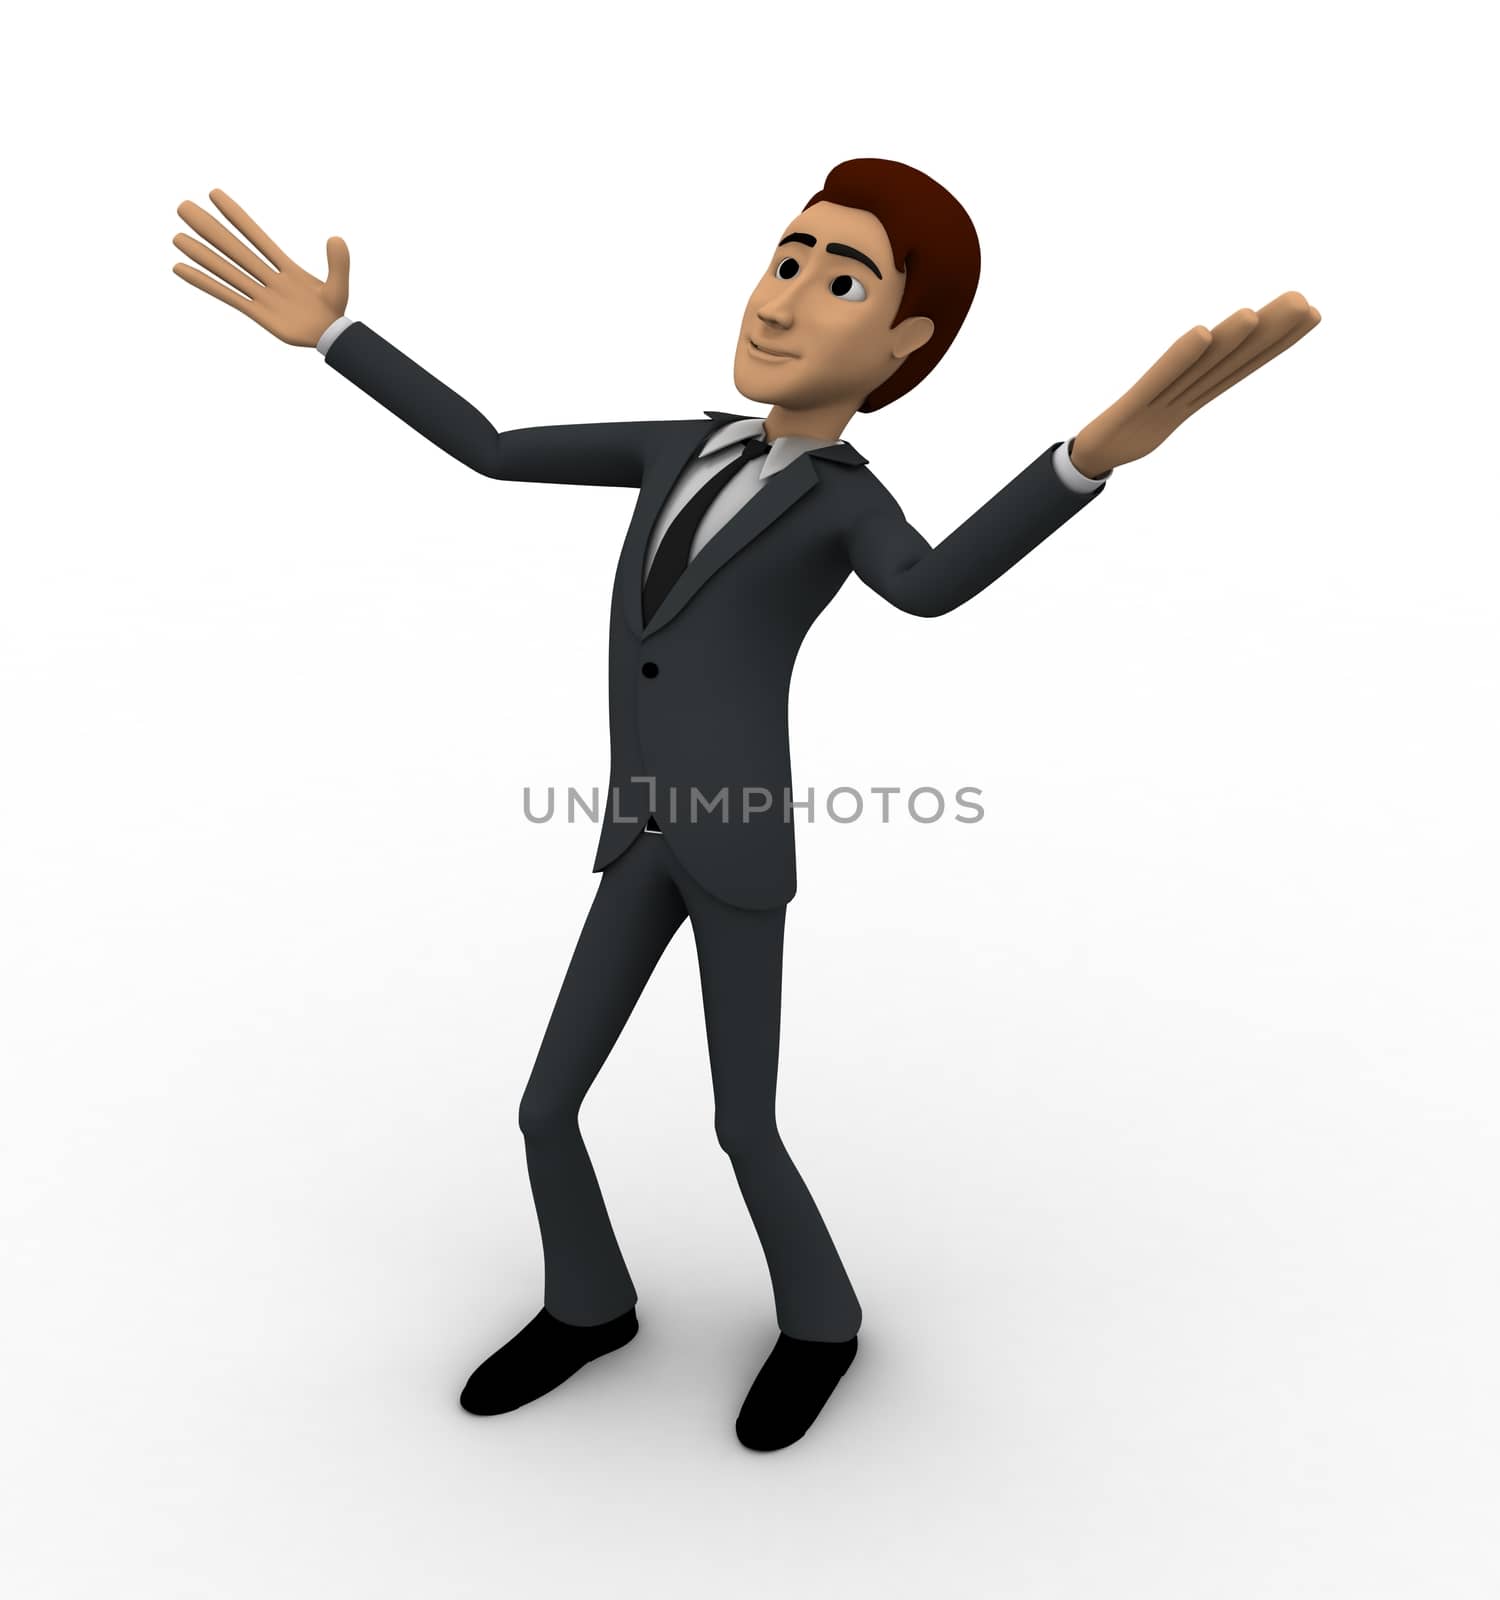 3d man dancing concept on white background, side angle view